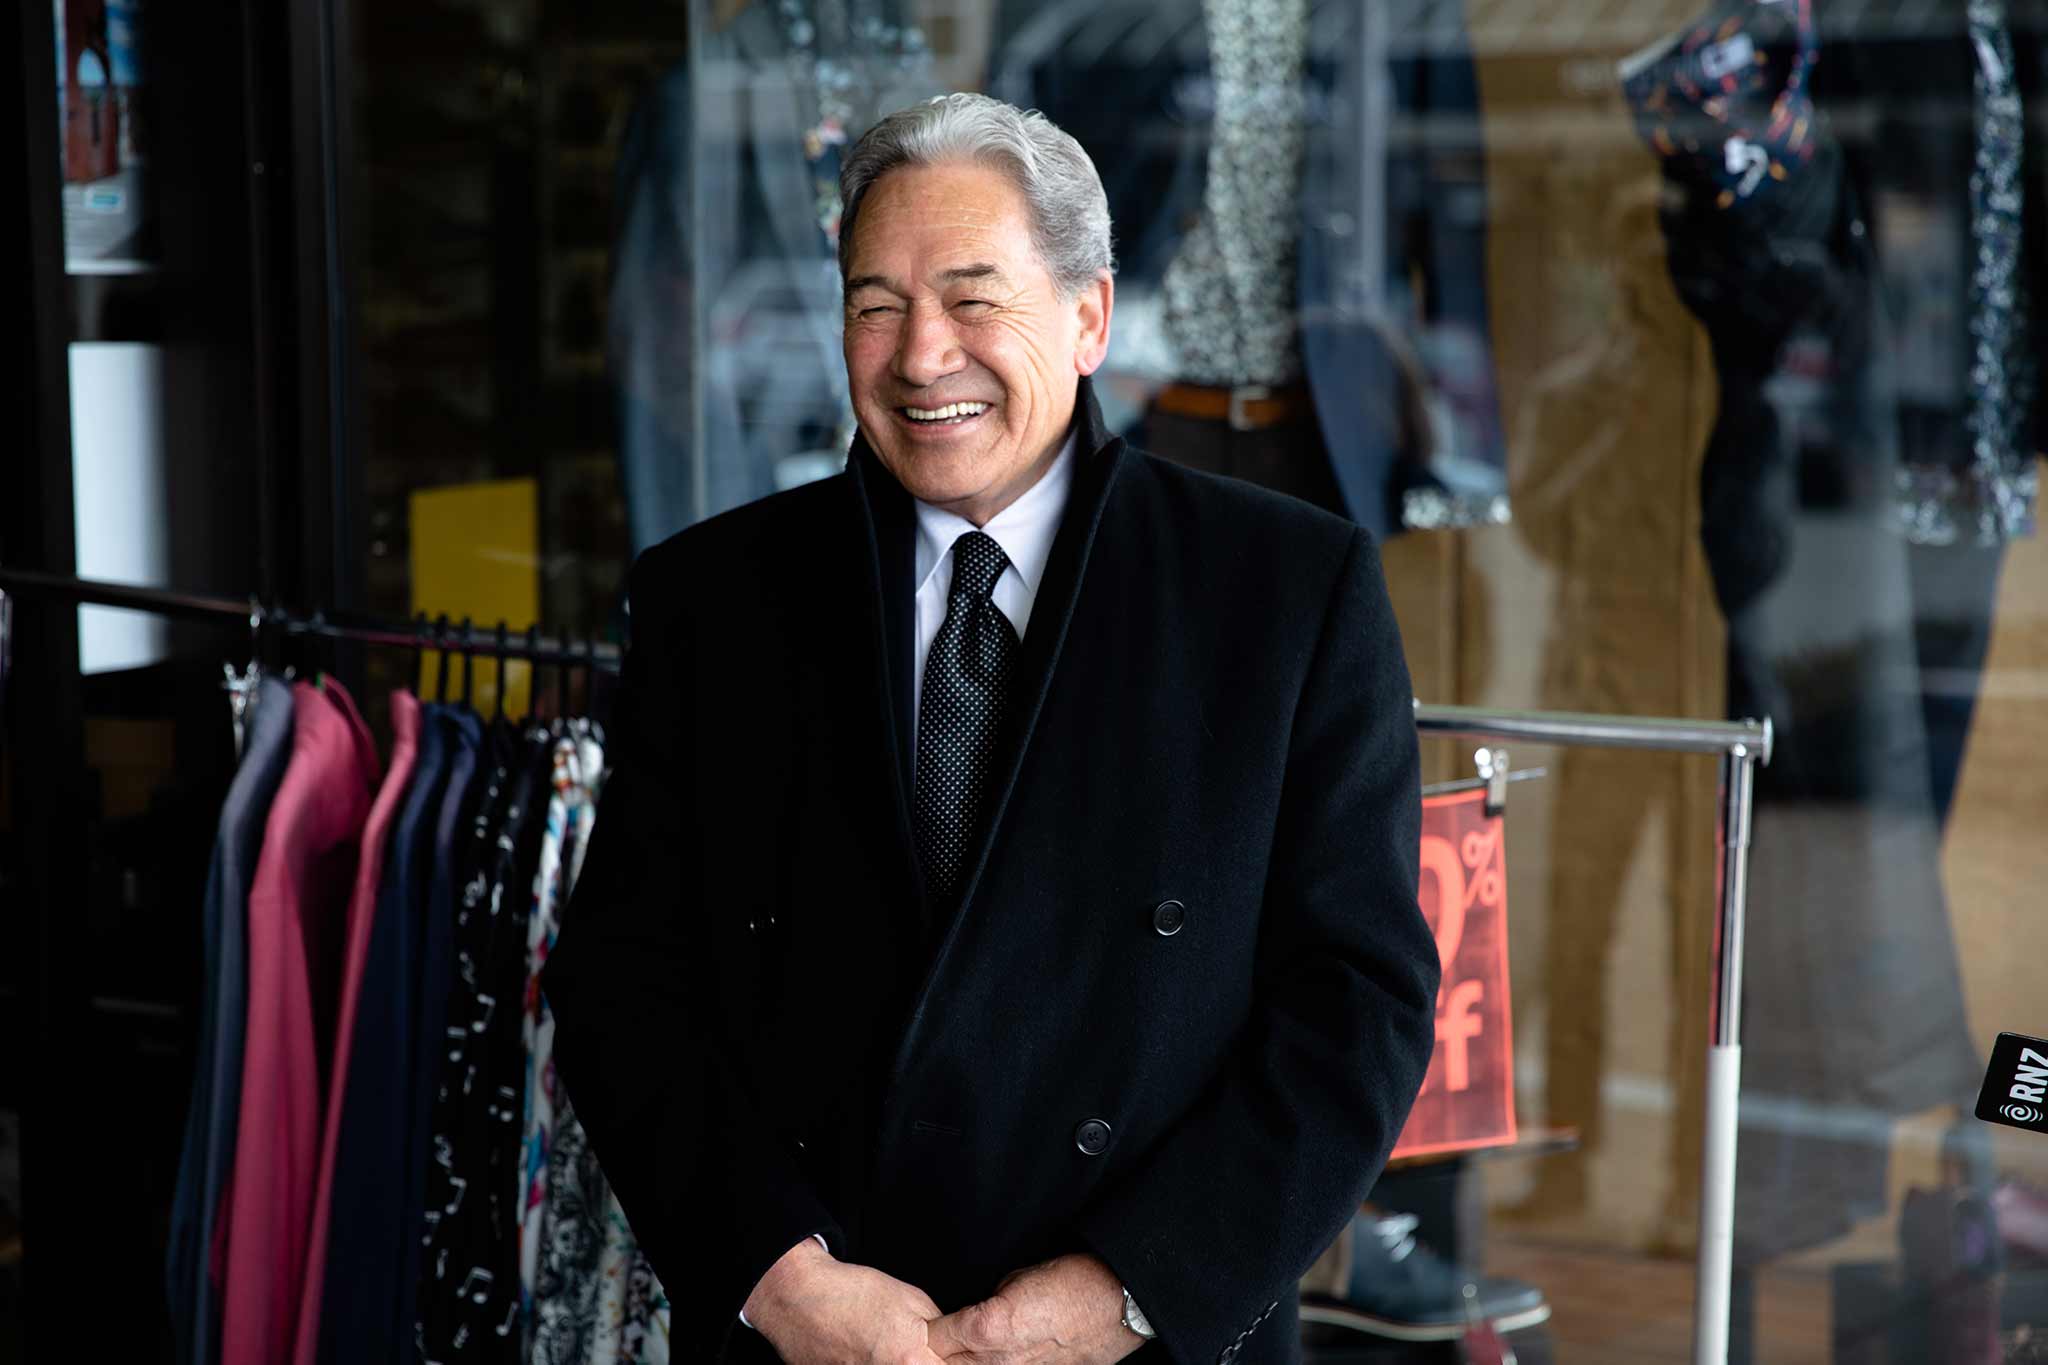 Photo of Winston Peters smiling and standing in front of a clothing store.